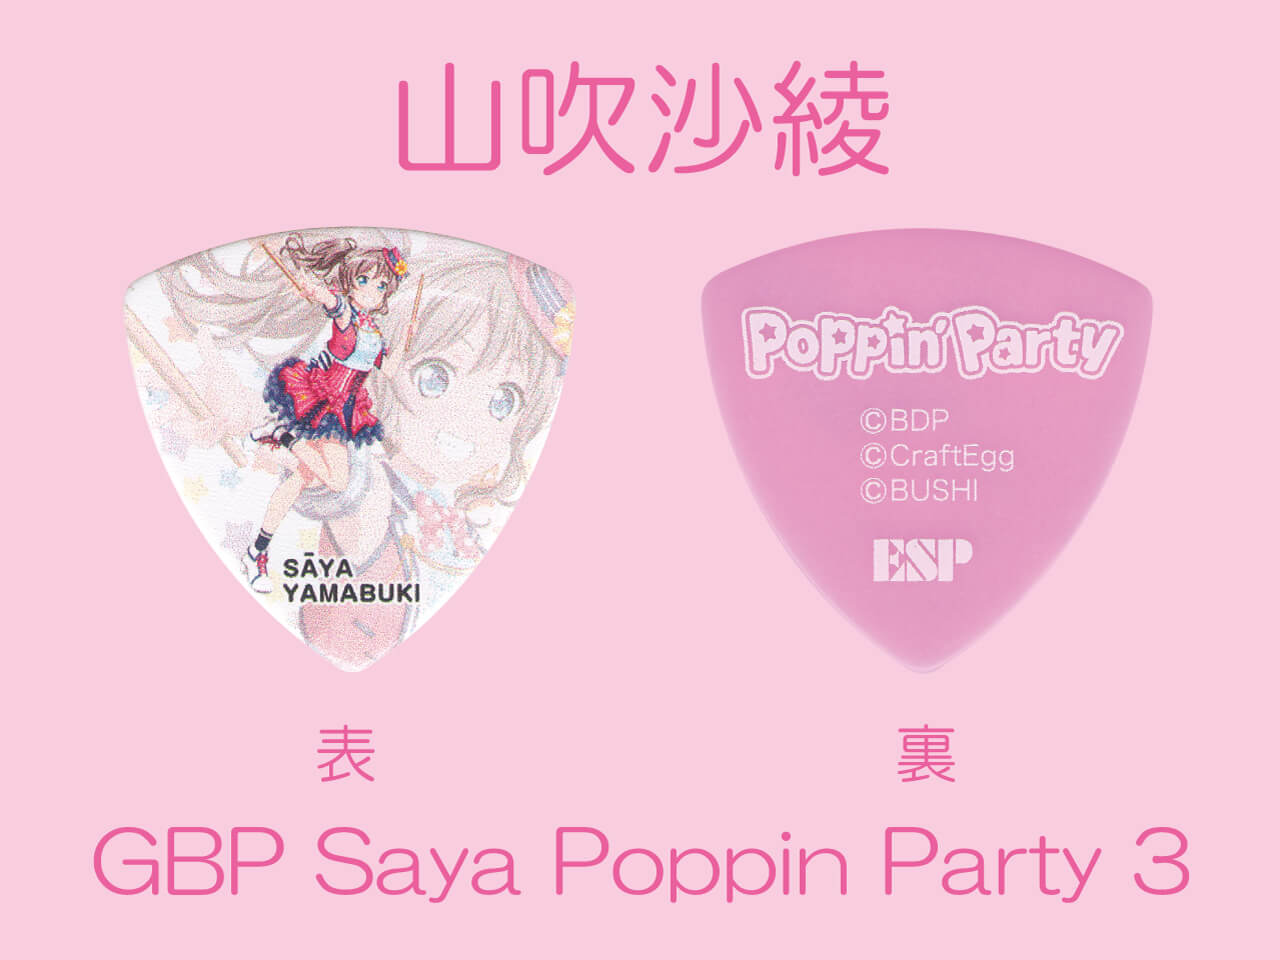 【ESP×BanG Dream!コラボピック】Poppin’Party Character Pick Ver.3 "山吹沙綾"（GBP Saya Poppin Party 3）＆”ハメパチ” セット